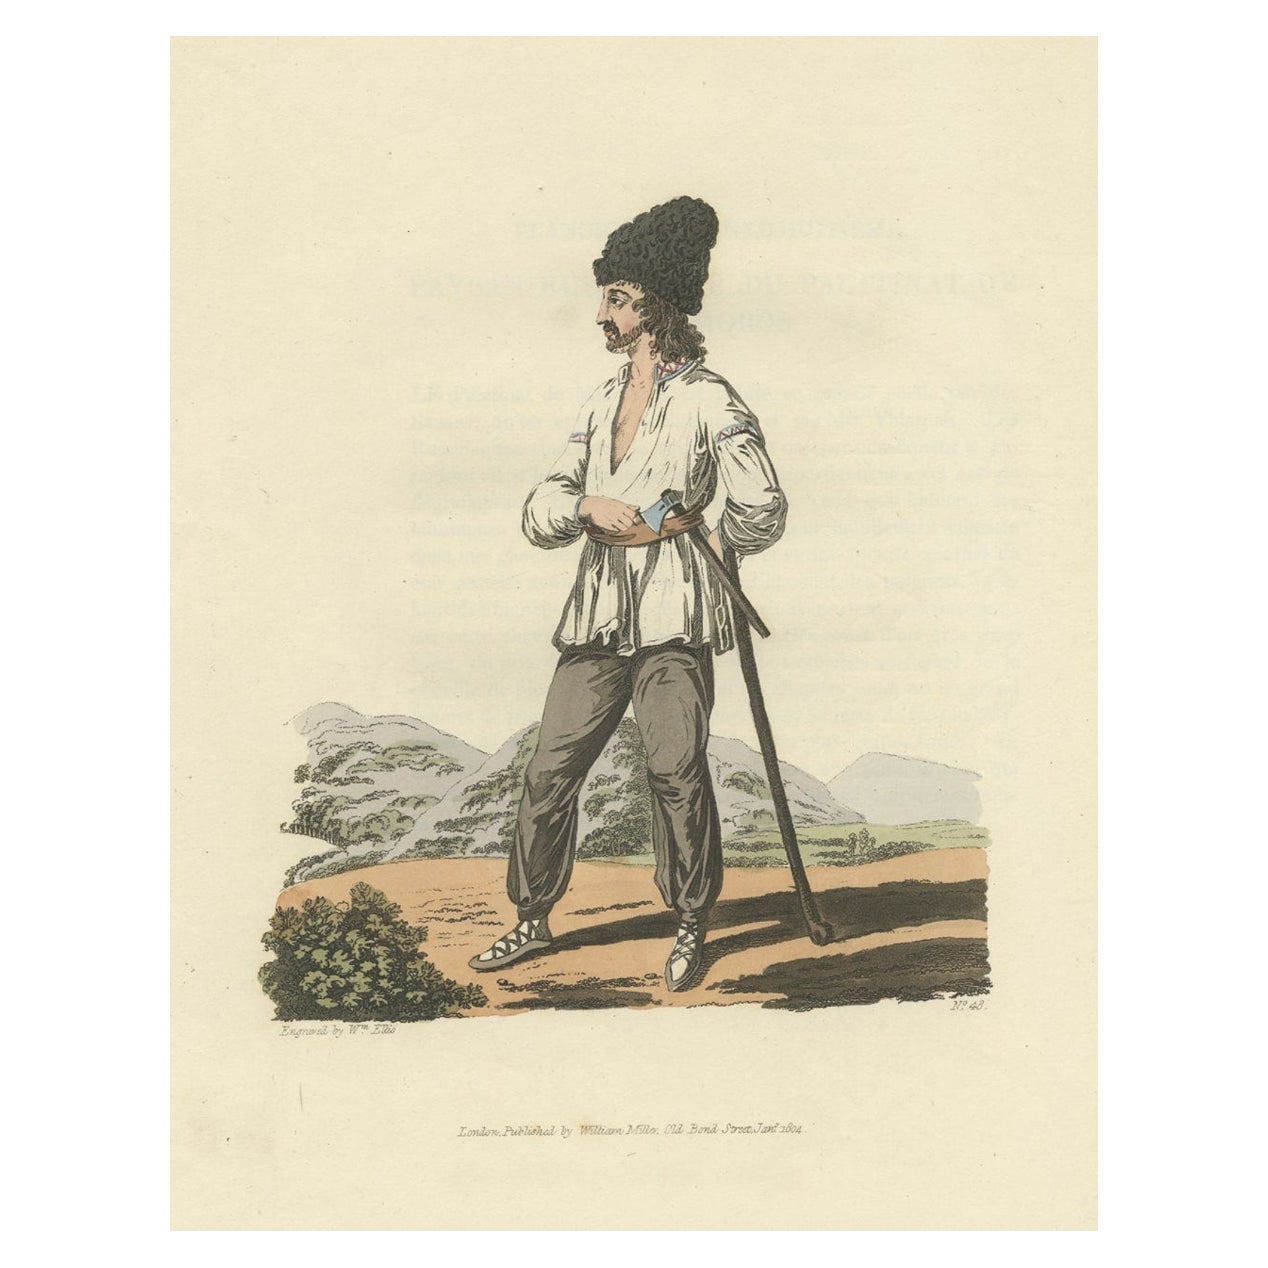 Old Original Hand-Colored Print of a Peasant of Little Russia, 1804